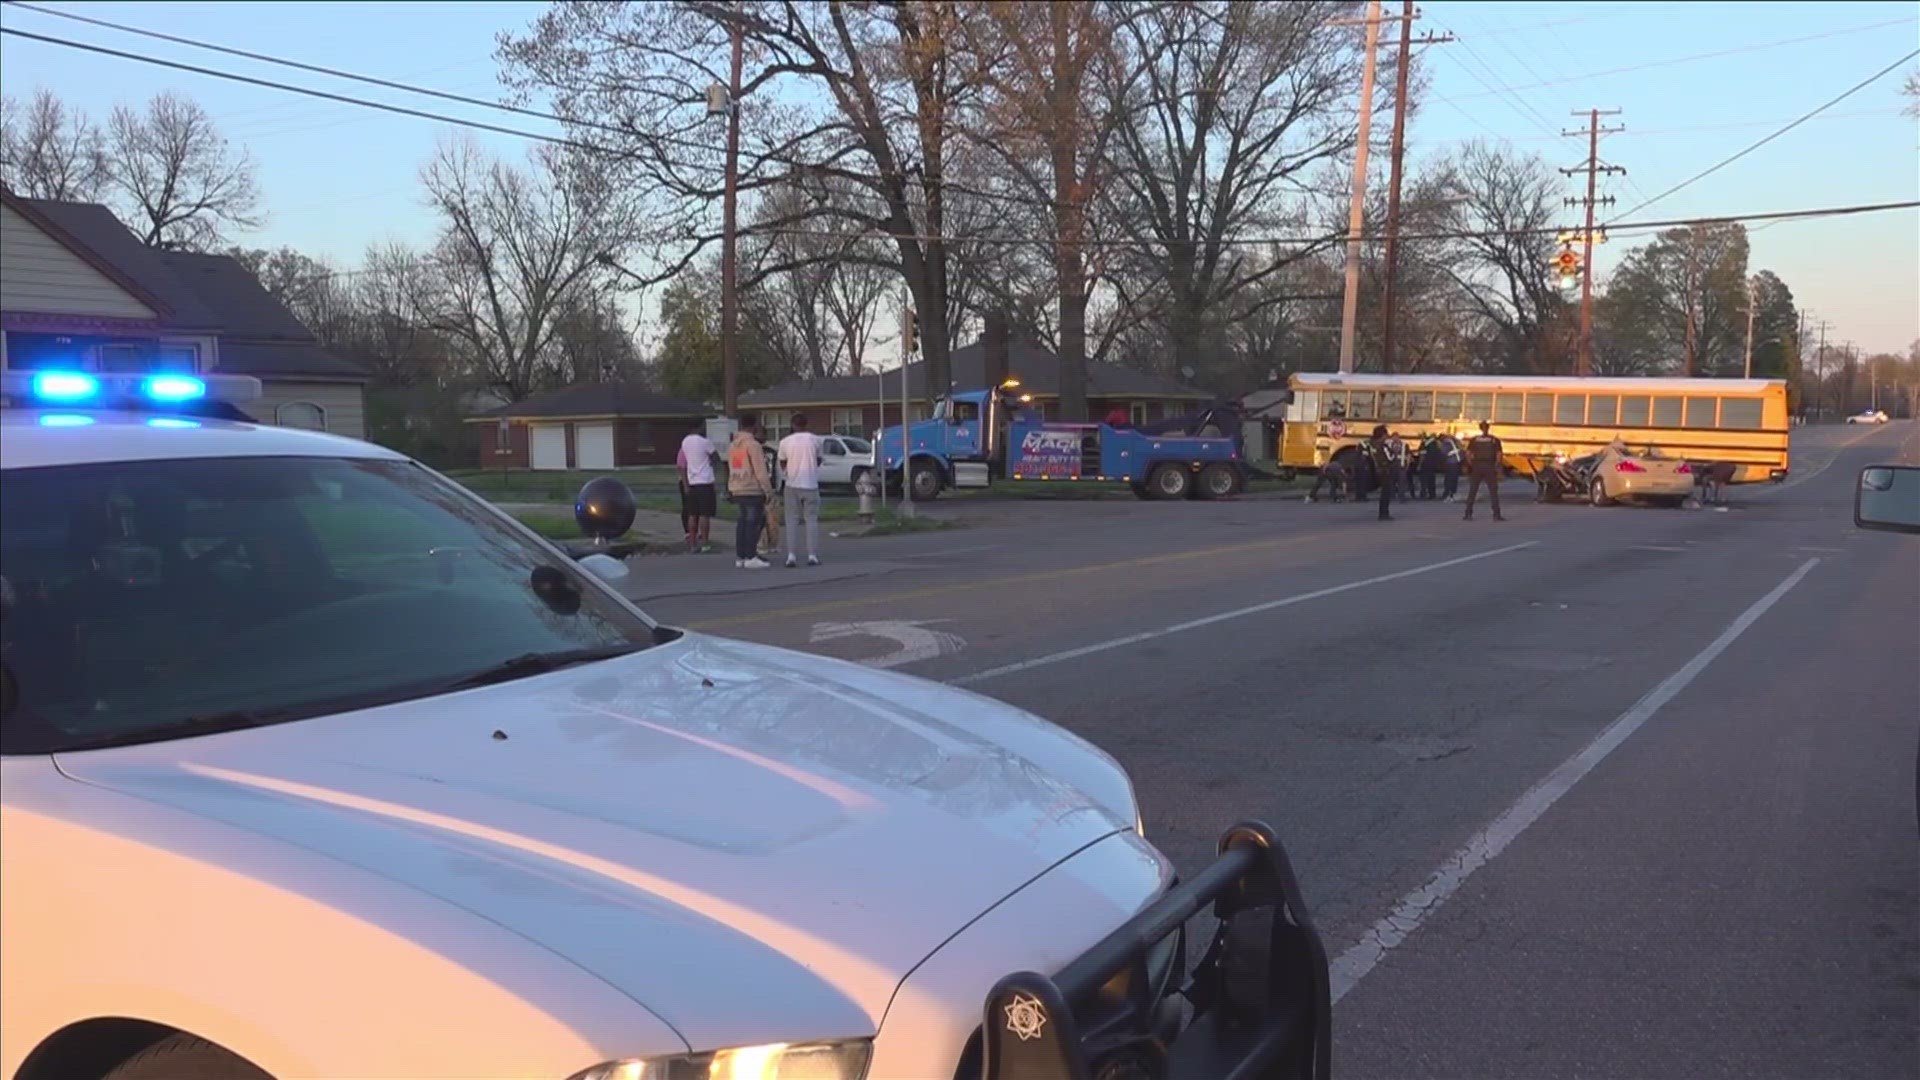 Police say no children were hurt after a two-vehicle crash with a school bus took place during rush hour traffic.